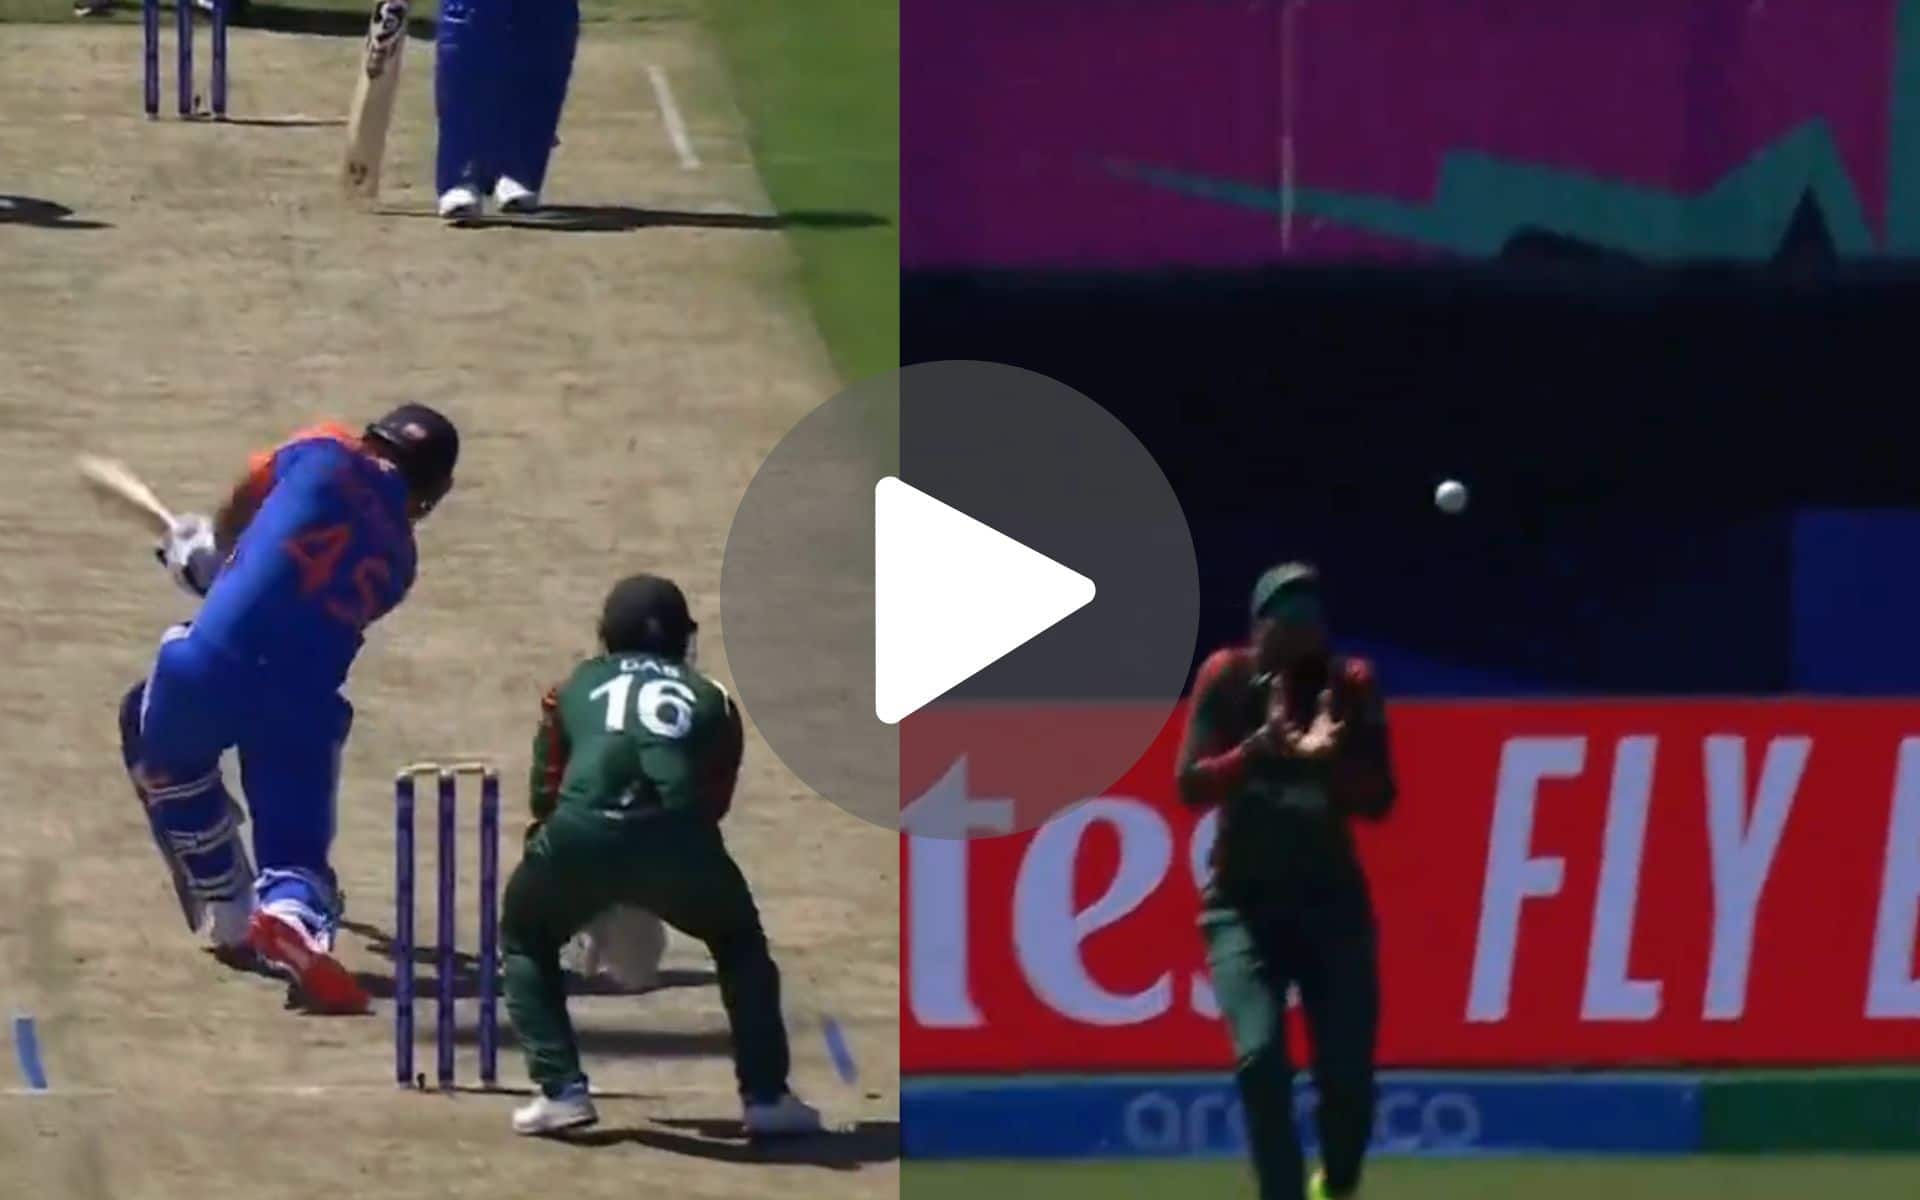 [Watch] Rohit Sharma's Mis-timed Slog Sweep Costs His Wicket At The Hands Of Mahmudullah